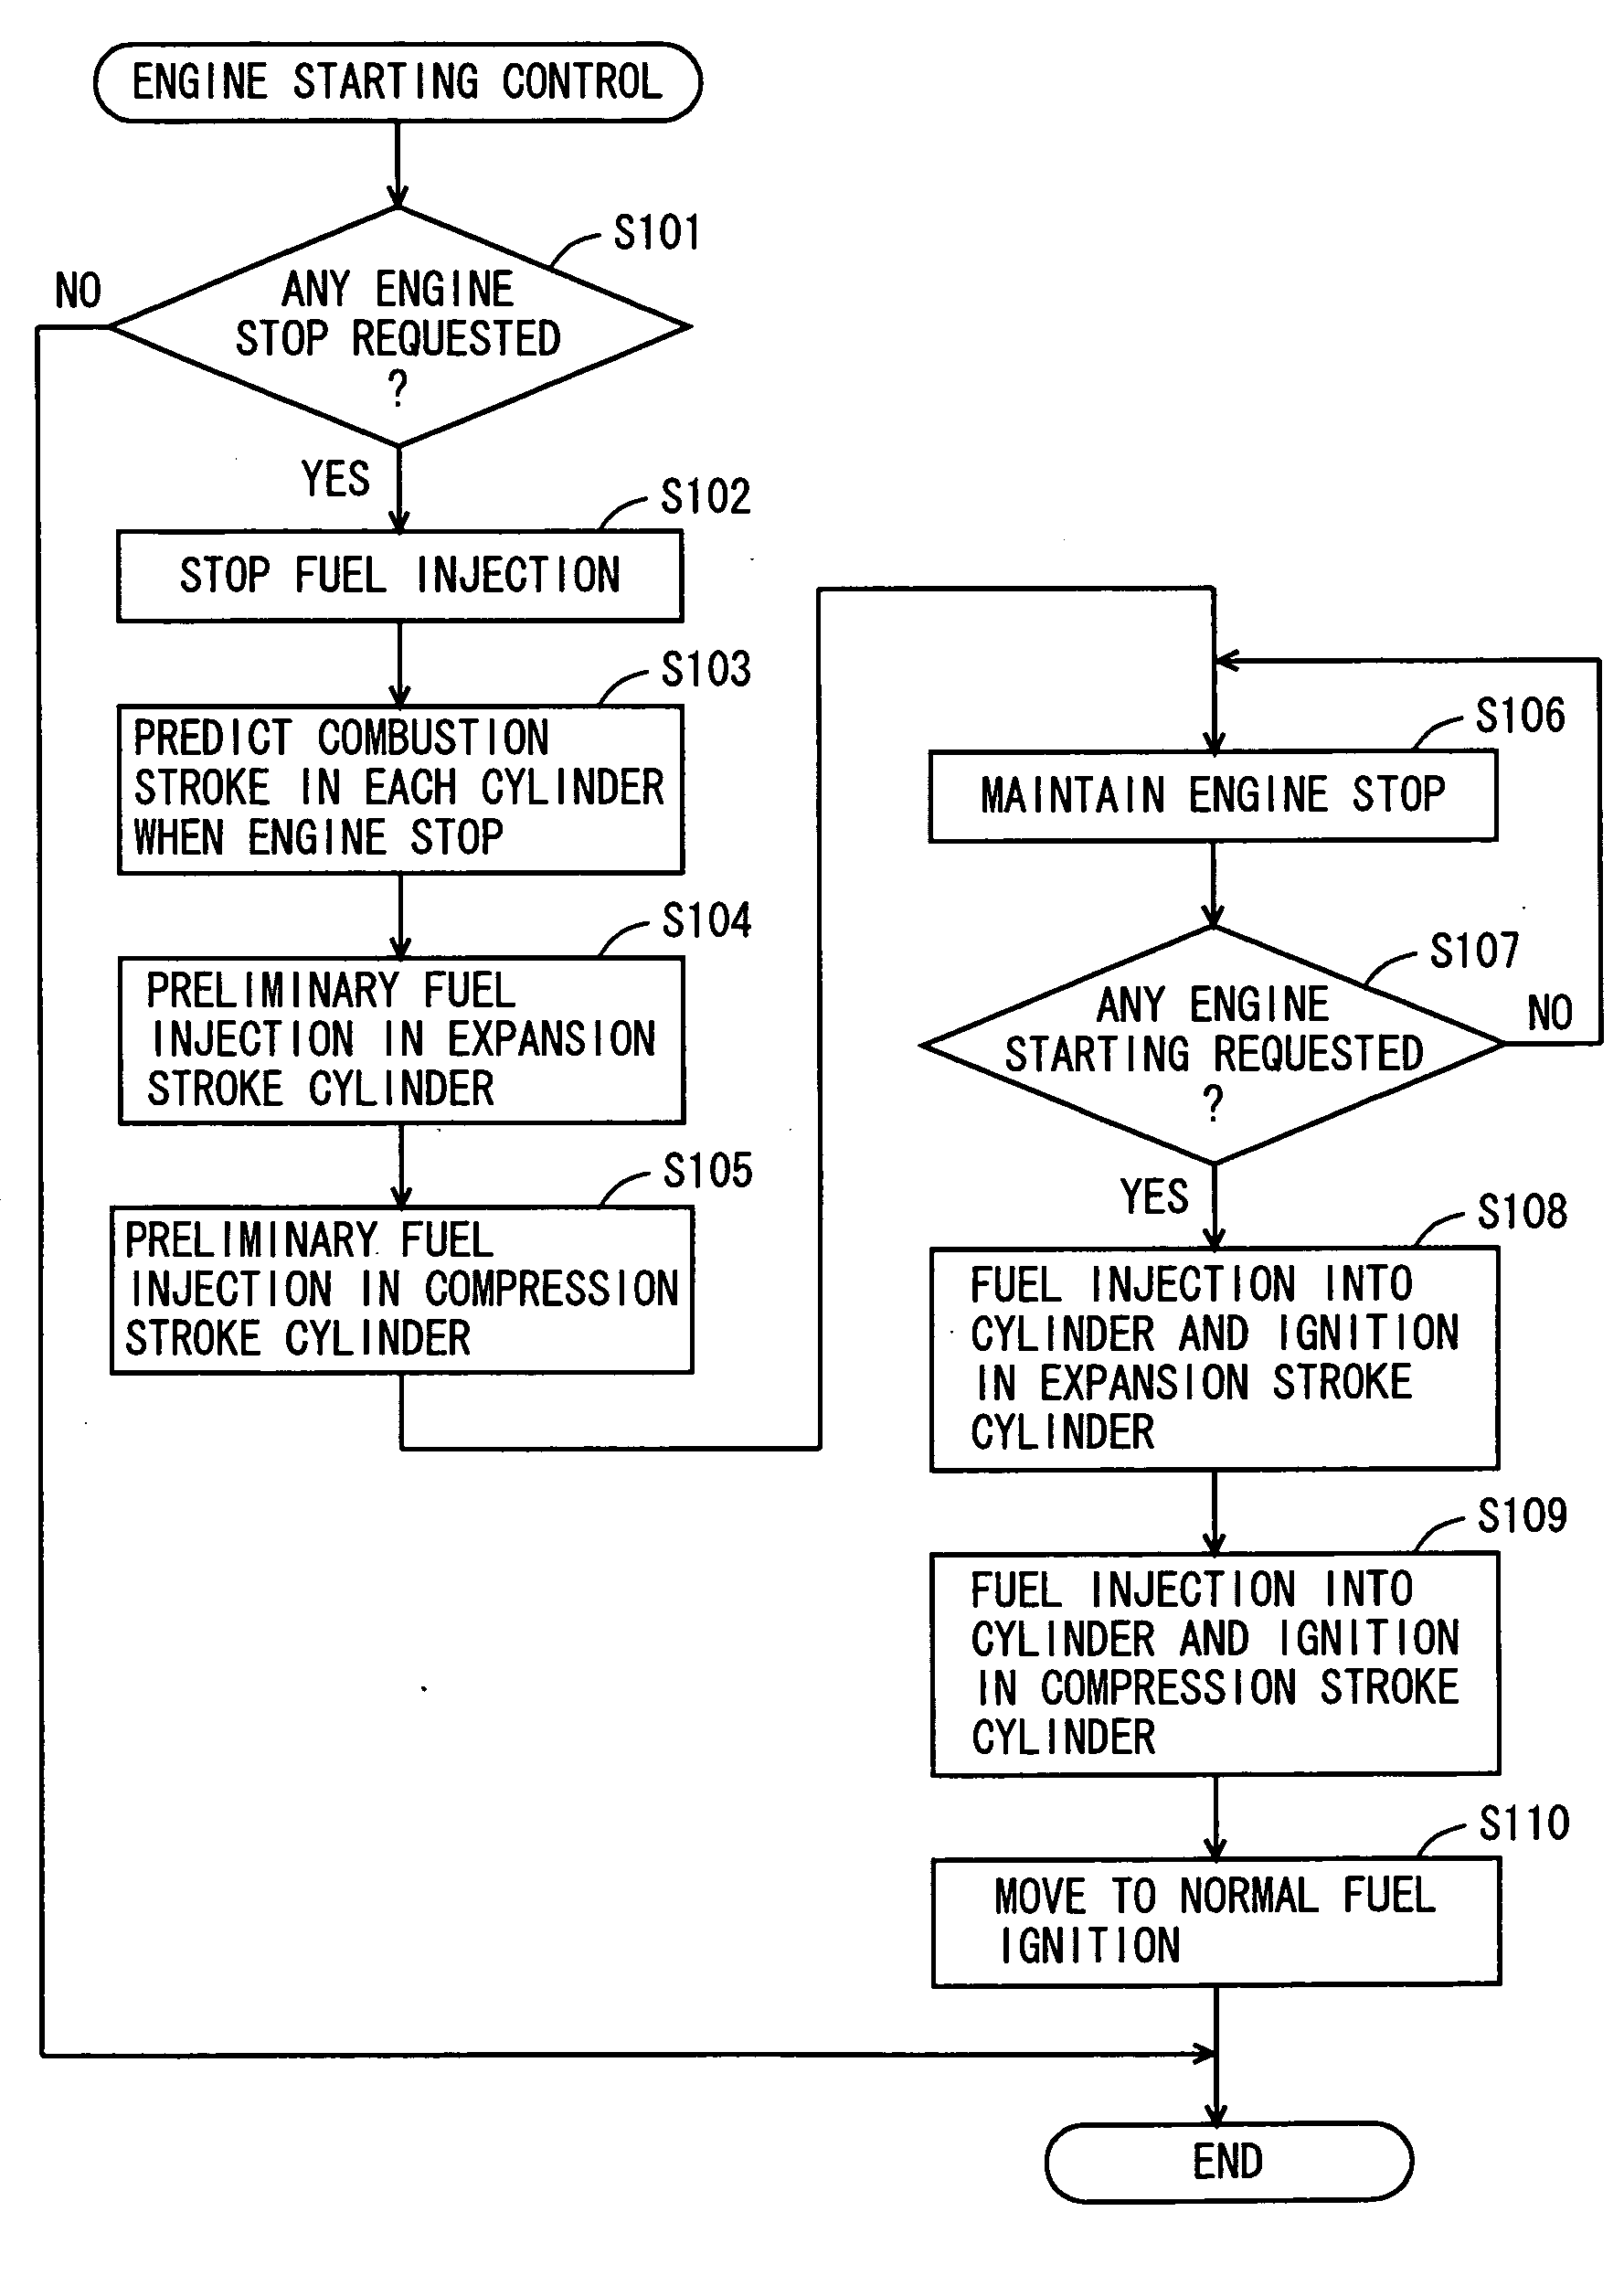 Engine starting control system of internal combustion engine